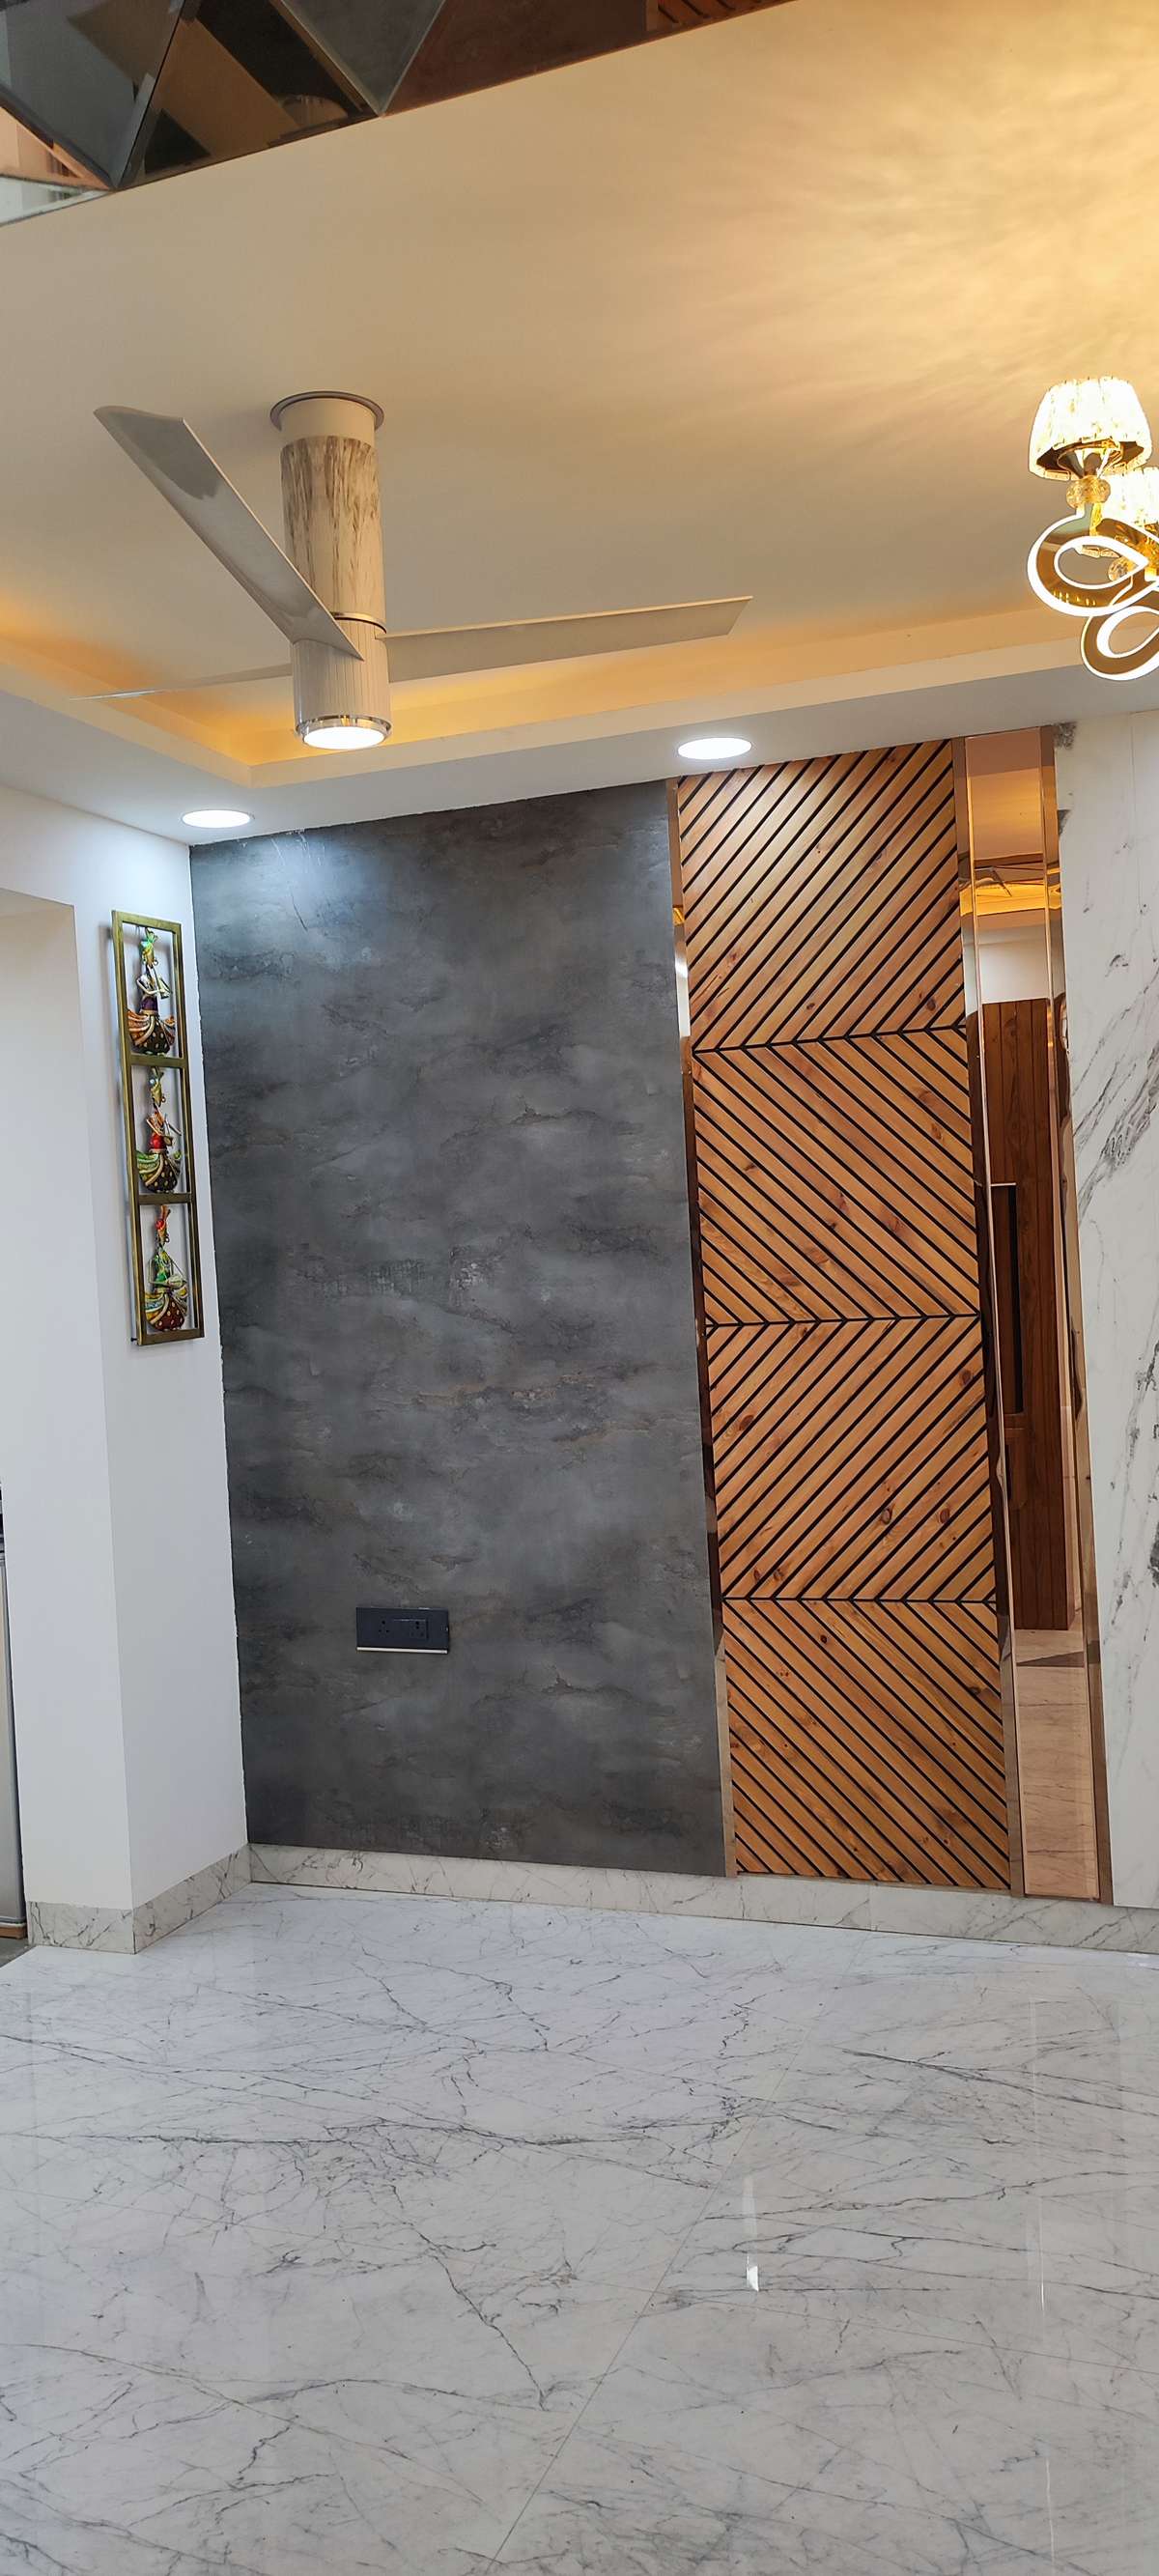 5Bhk kitchen and wardrobe and panel wall 
design pic
please support my you tube channel
#https://youtu.be/VRf87iT0stQ
#https://youtube.com/channel/UCvf-dZ01rkzYOo9dxr390sw #InteriorDesigner #Architect #Architectural&Interior